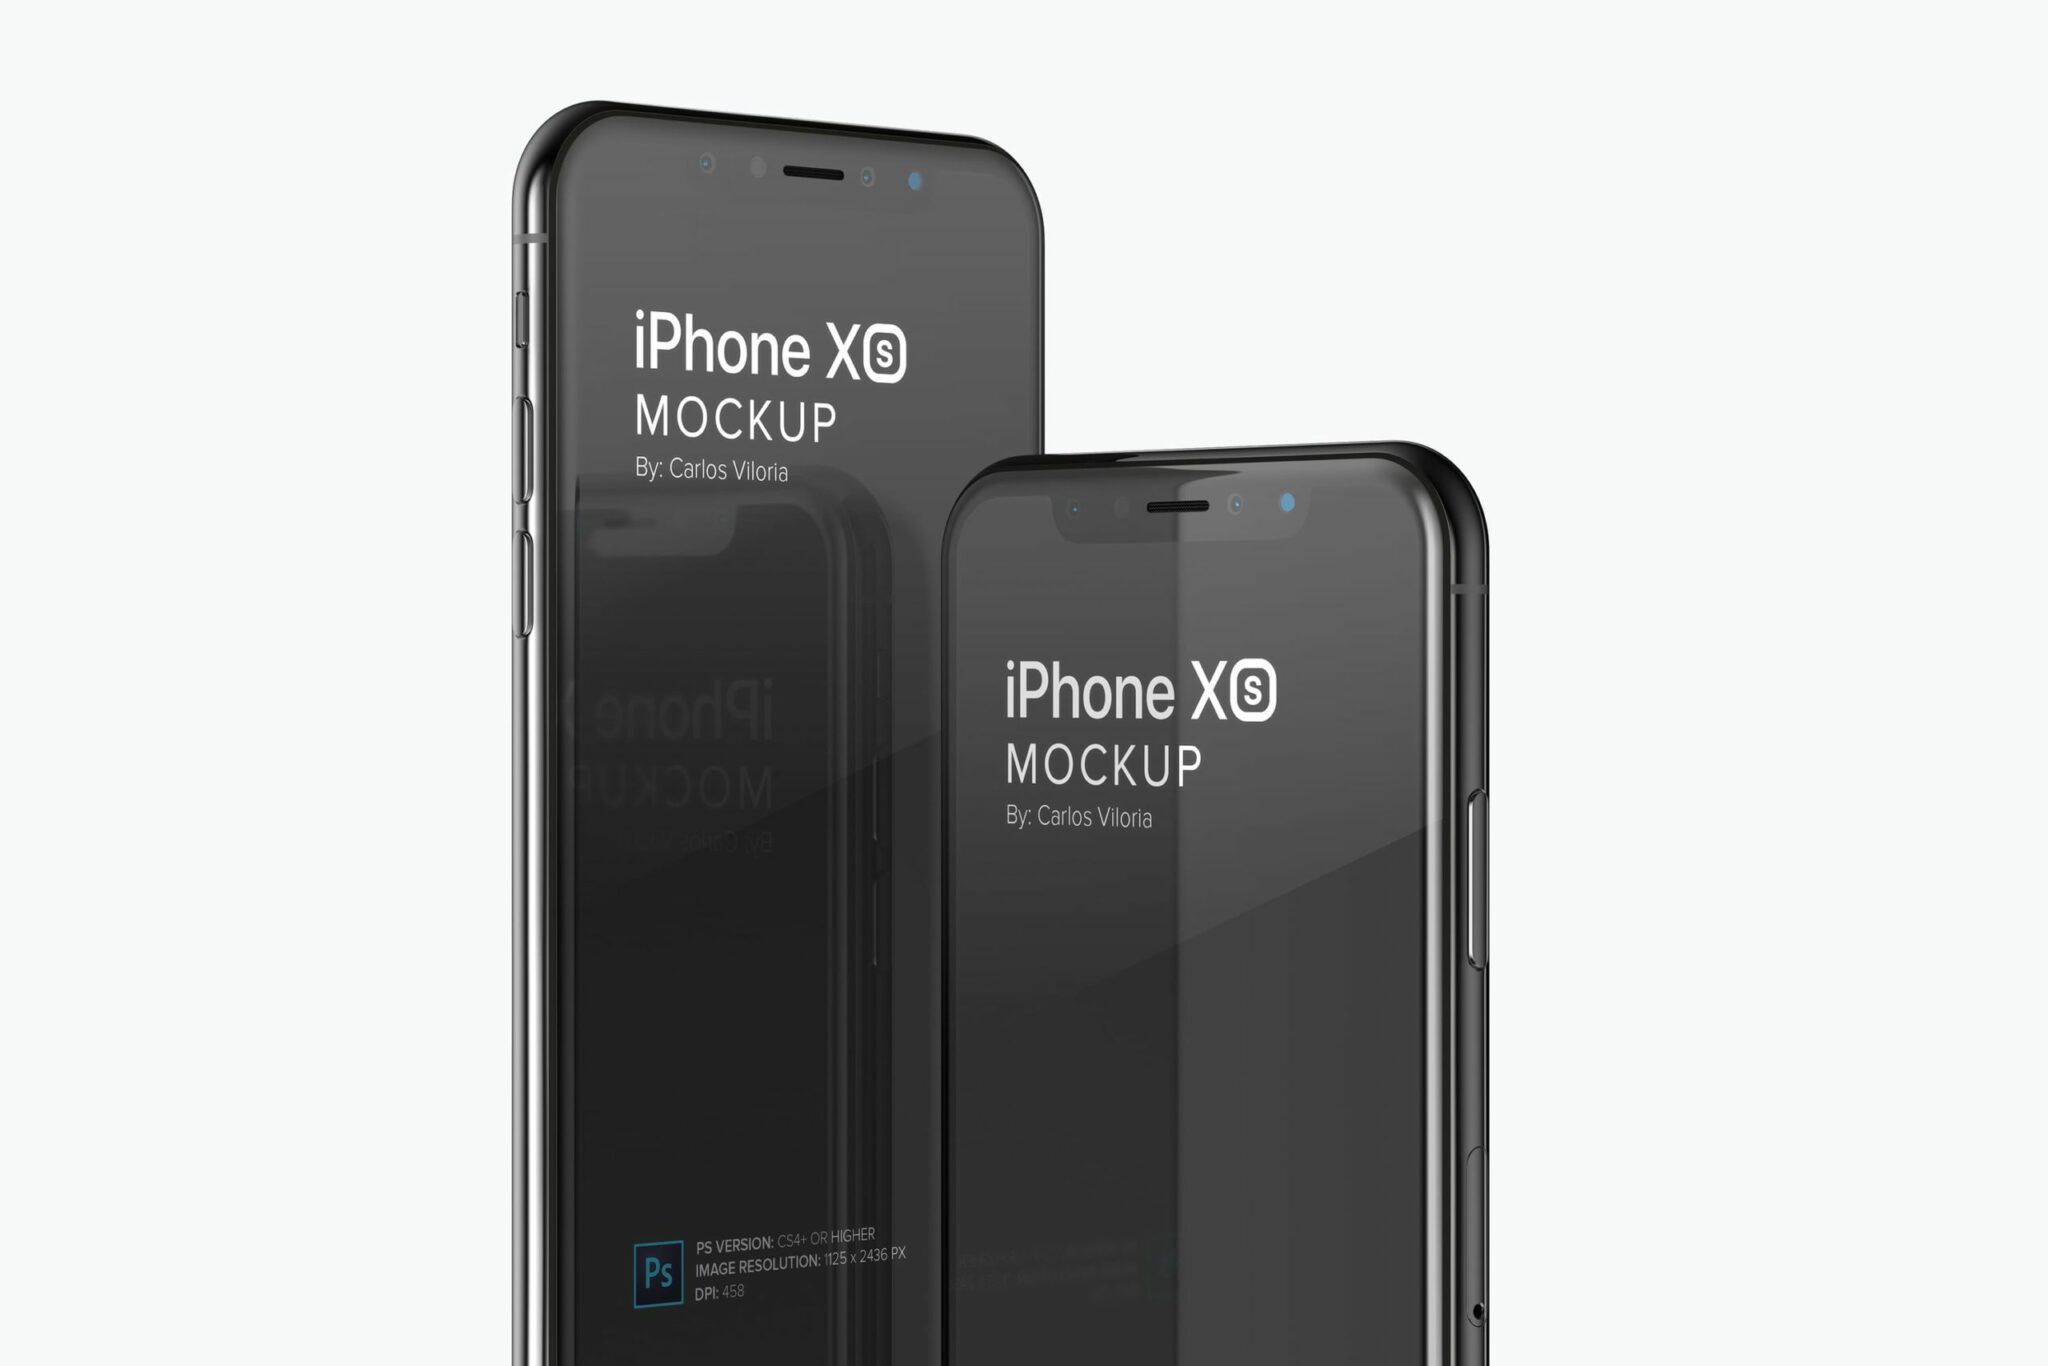 Free Mockup: iPhone XS to Display UI Apps for iOS